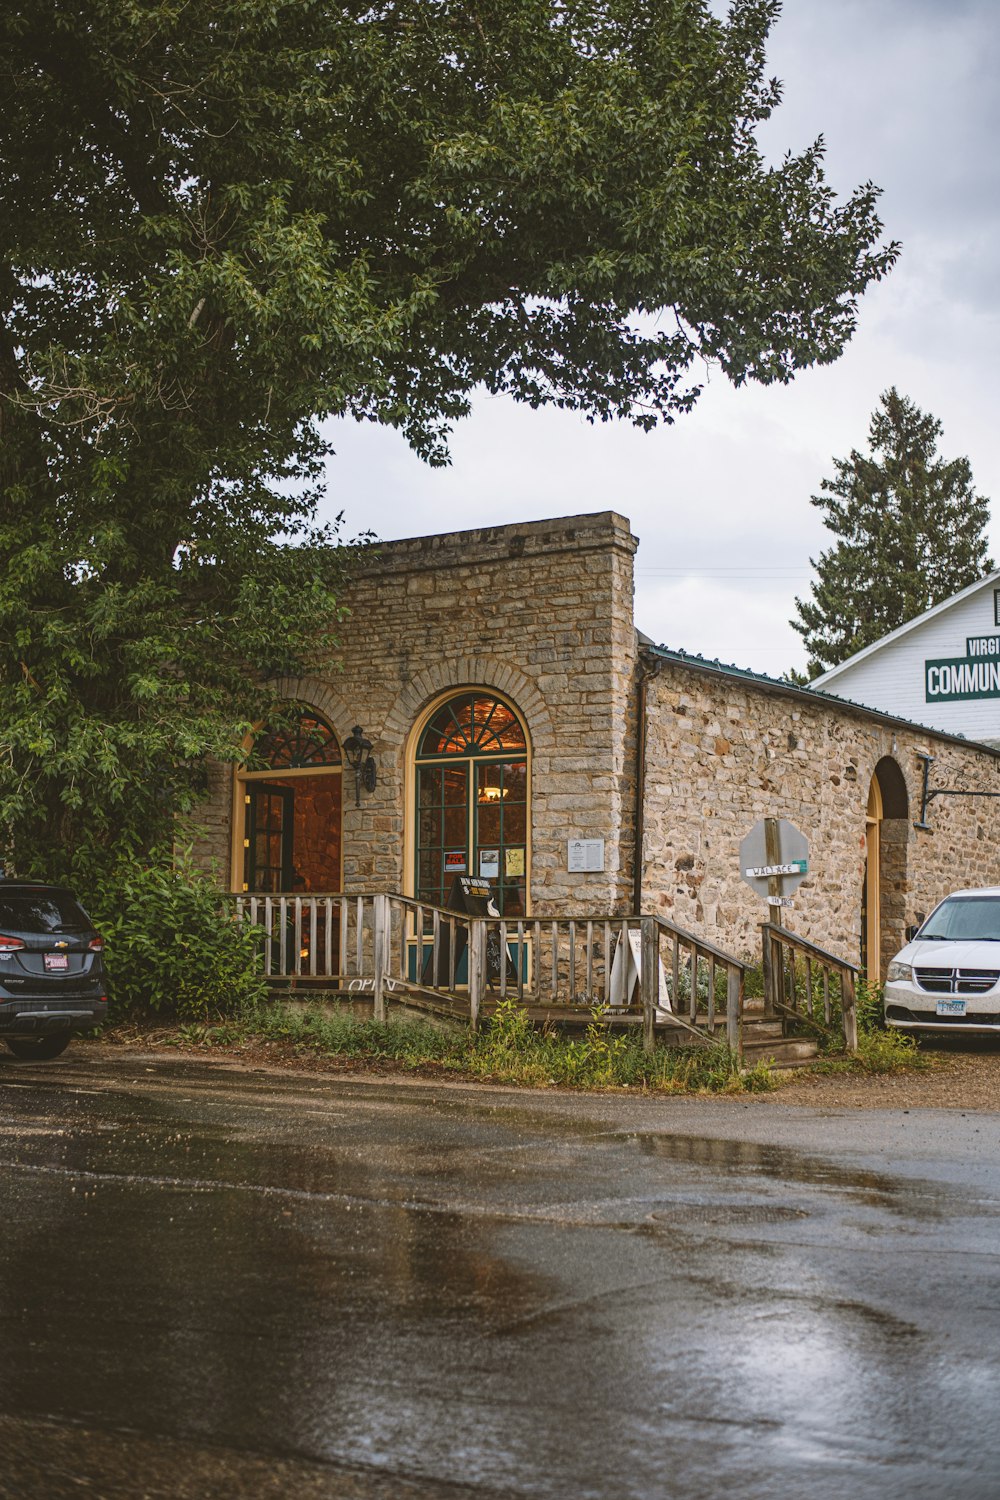 a car parked in front of a stone building